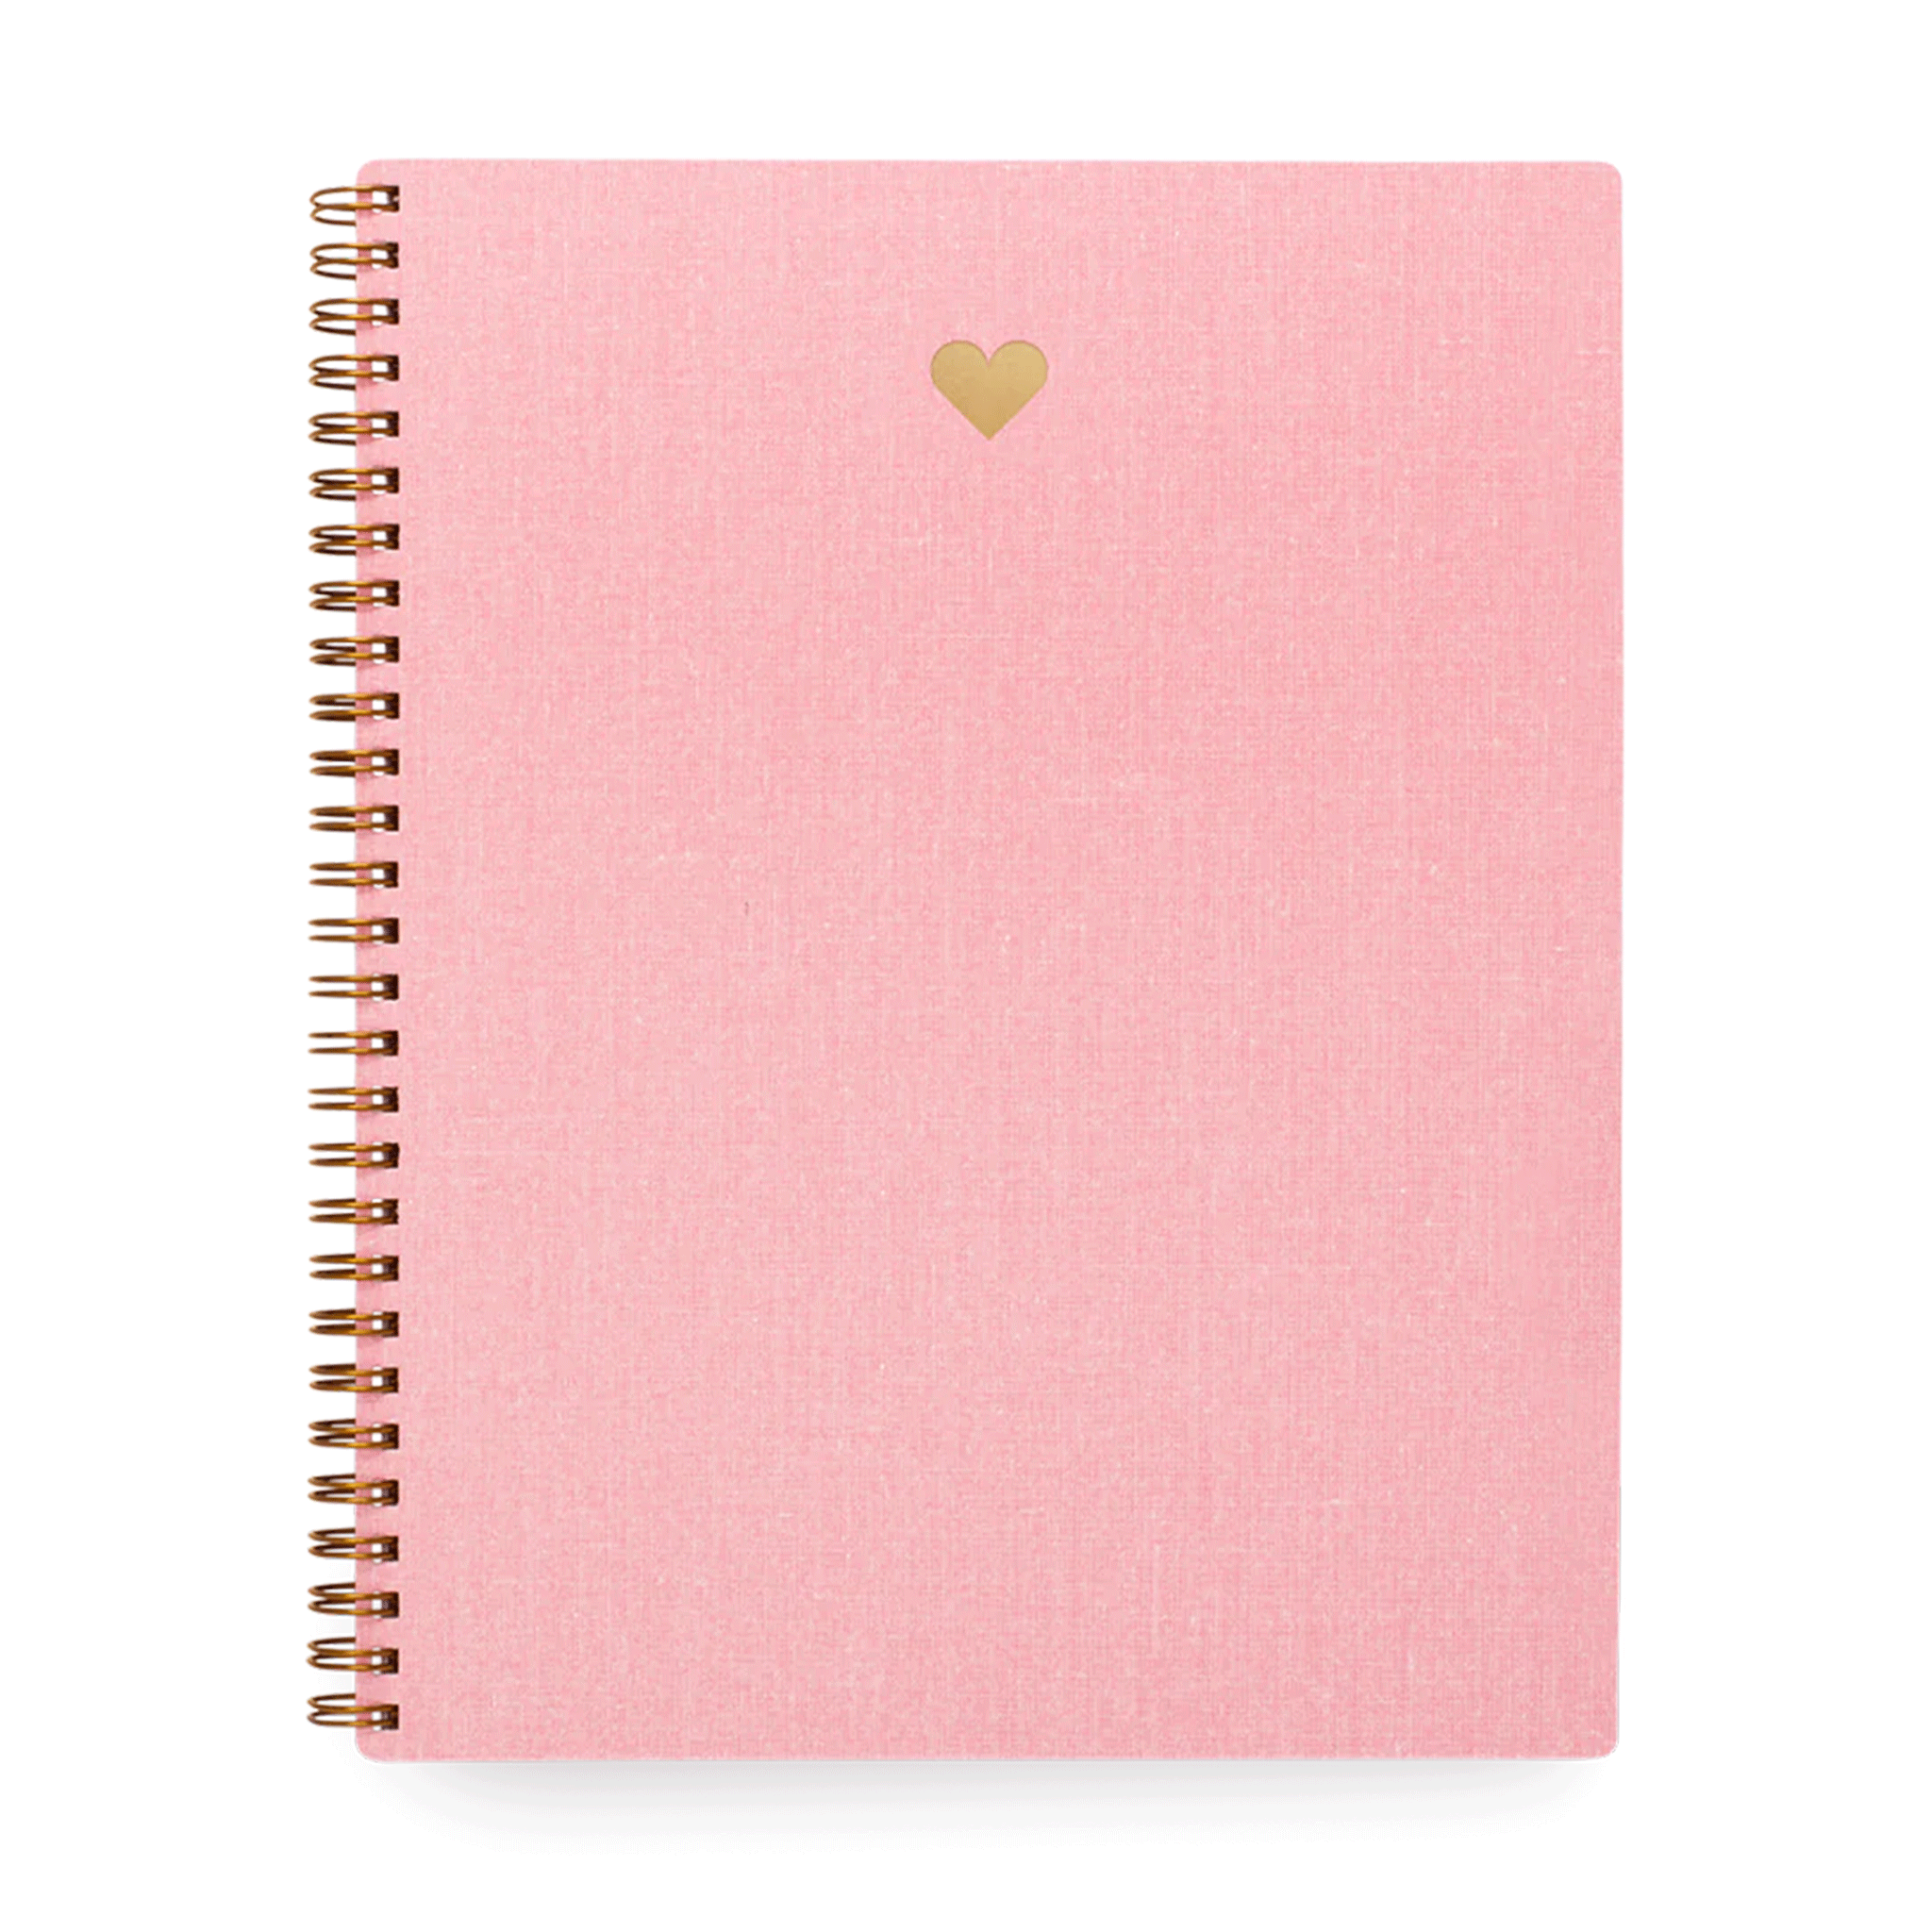 On a white background is a pink spiral bound notebook with a heart shape on the front. 